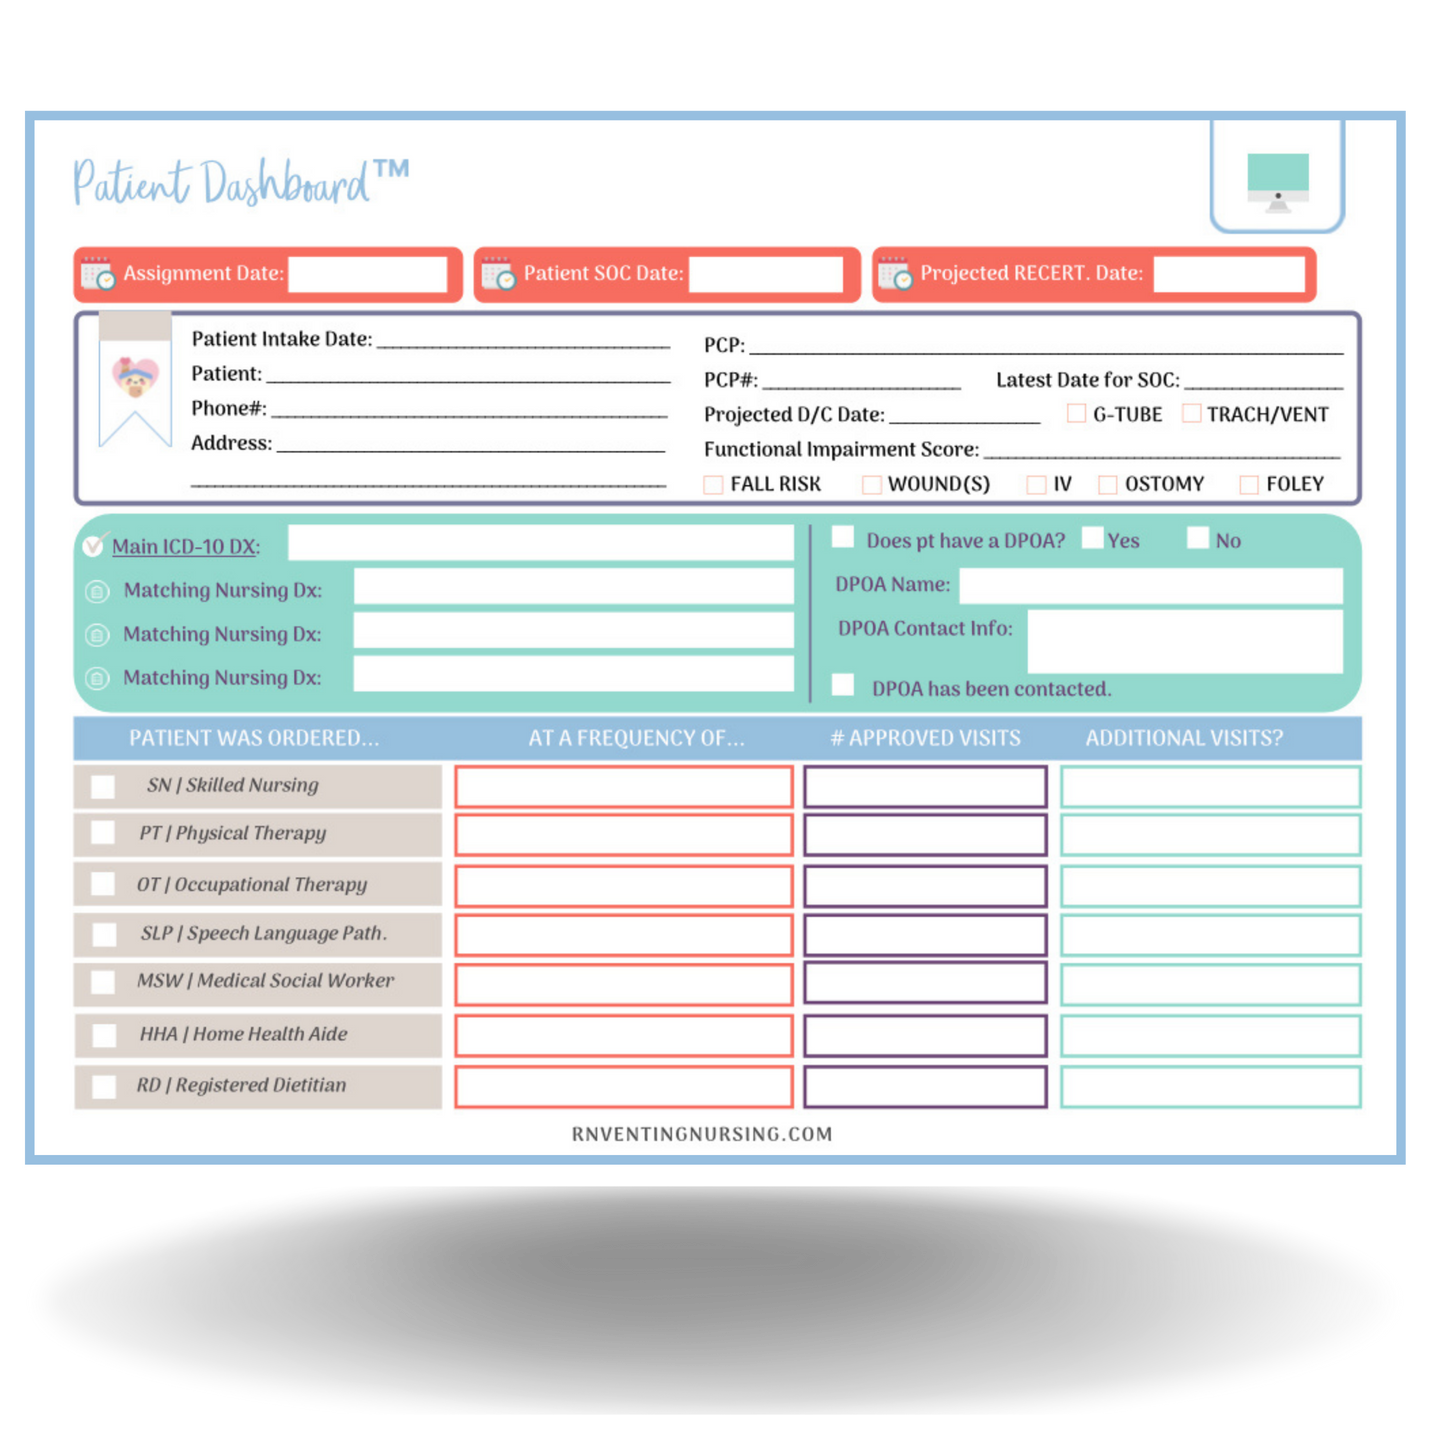 The Patient Dashboard™ Notepad Print-It-Yourself (PIY) for Home Health Nurses